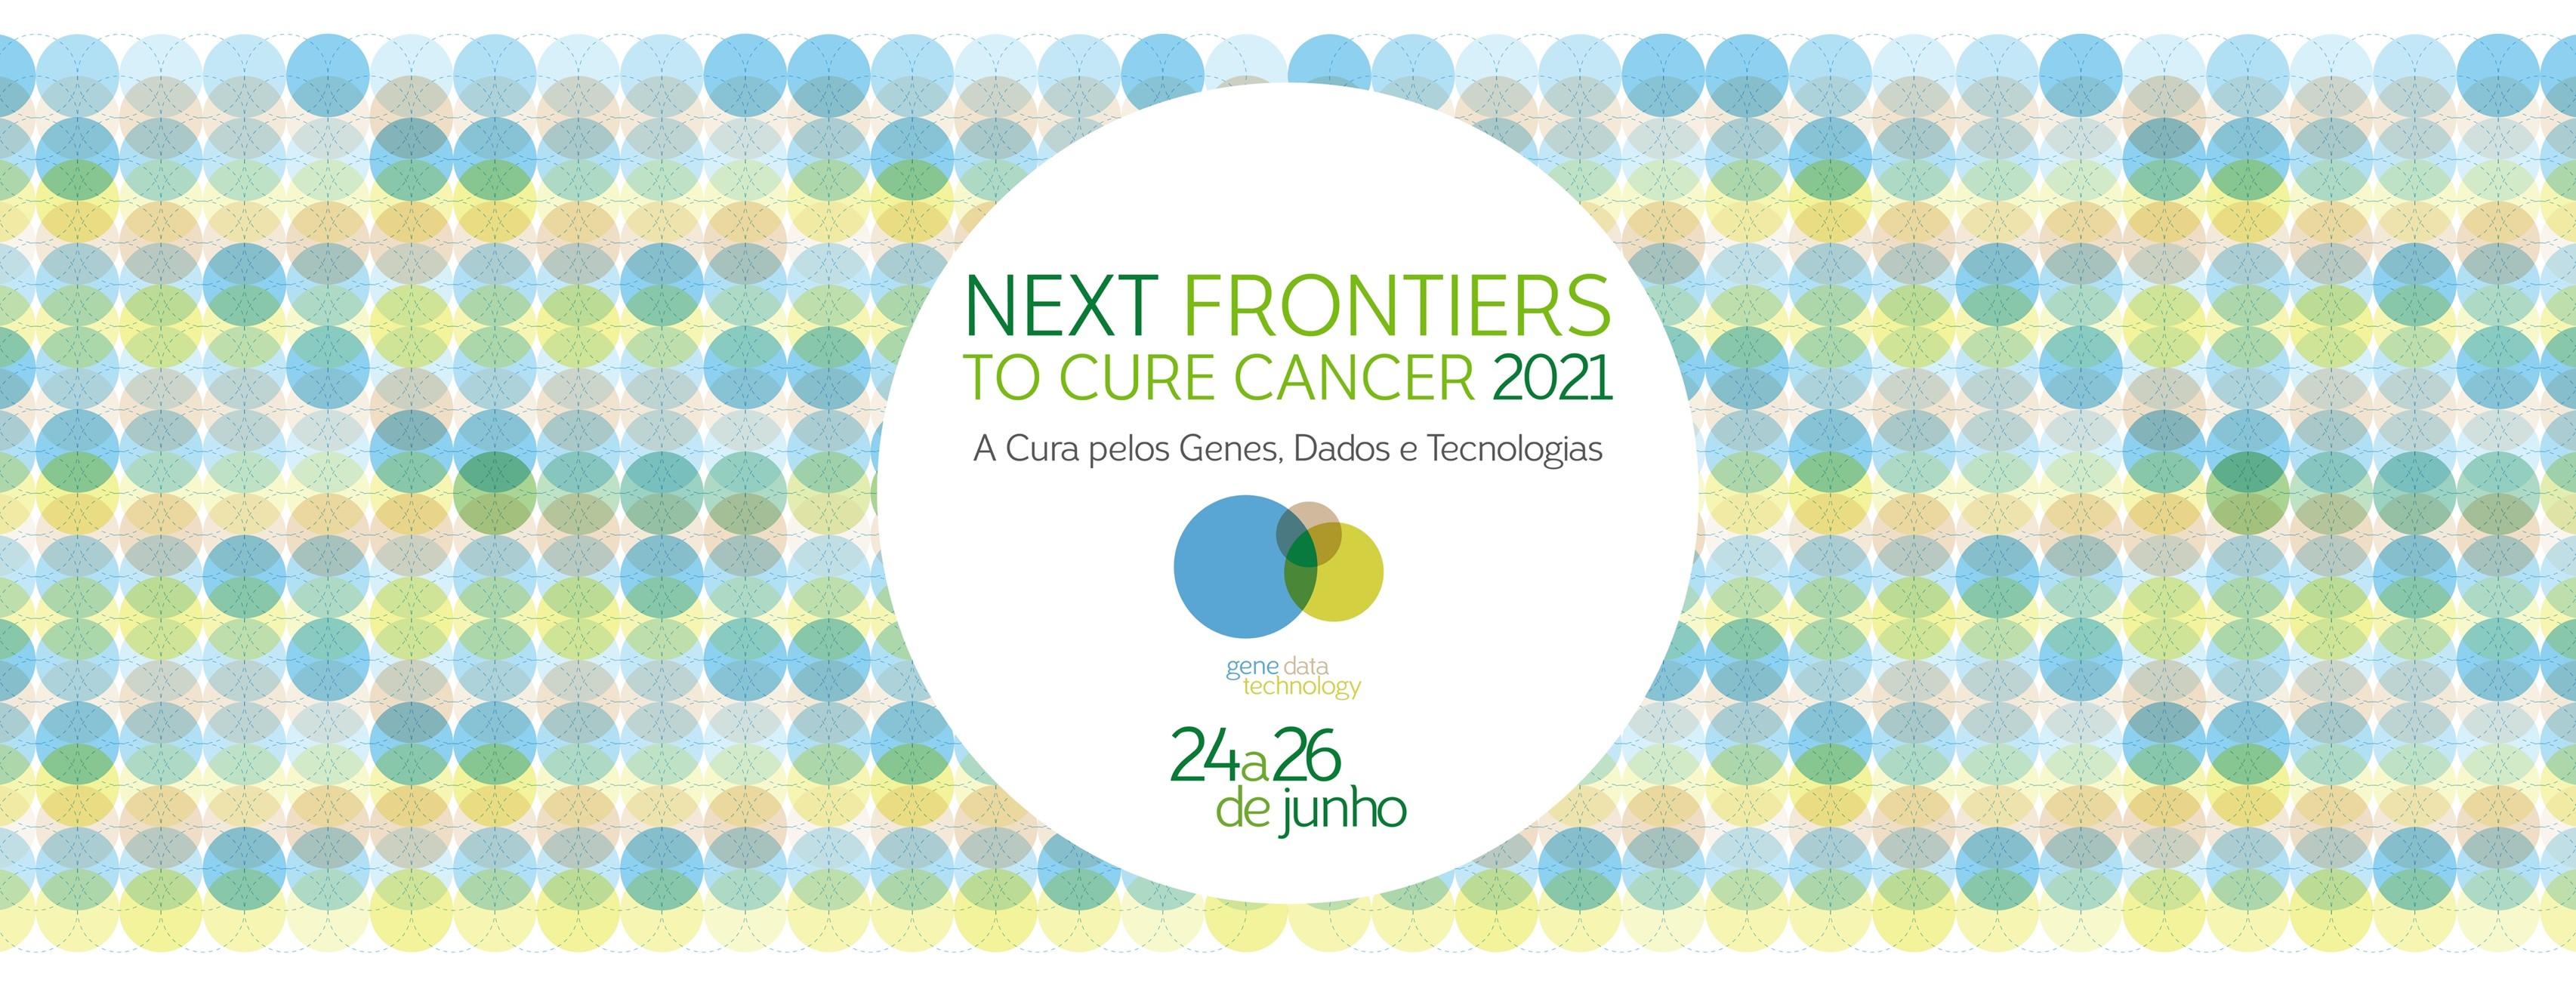 Next Frontiers to Cure Cancer 2021